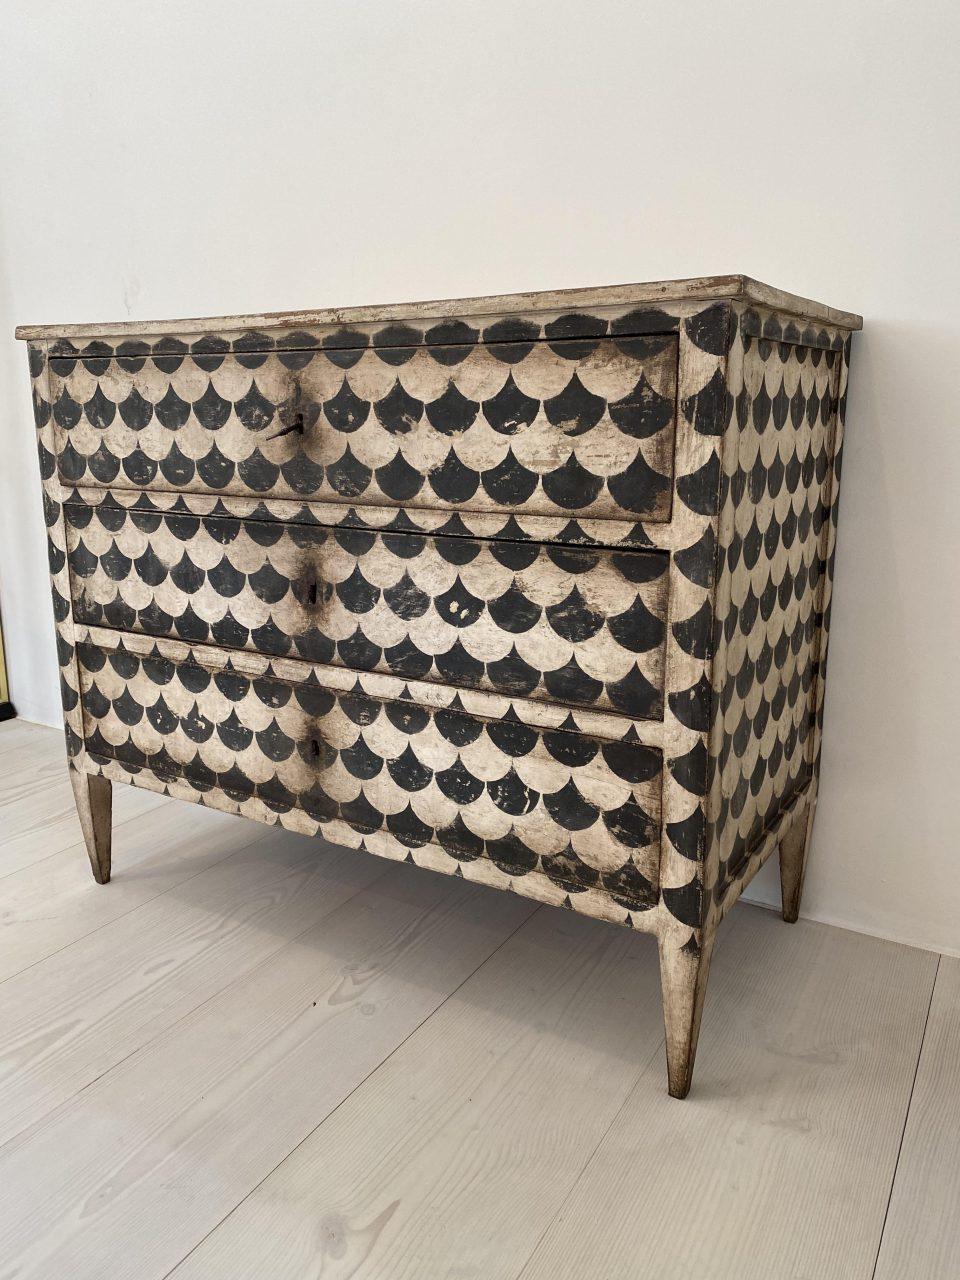 Elegant and eye-catching Italian dresser / commode / drawer furniture graphically painted in black and white. Dates from around the end of the 19th century and is a solid quality piece of furniture with 3 spacious compartments and fine tapered legs.